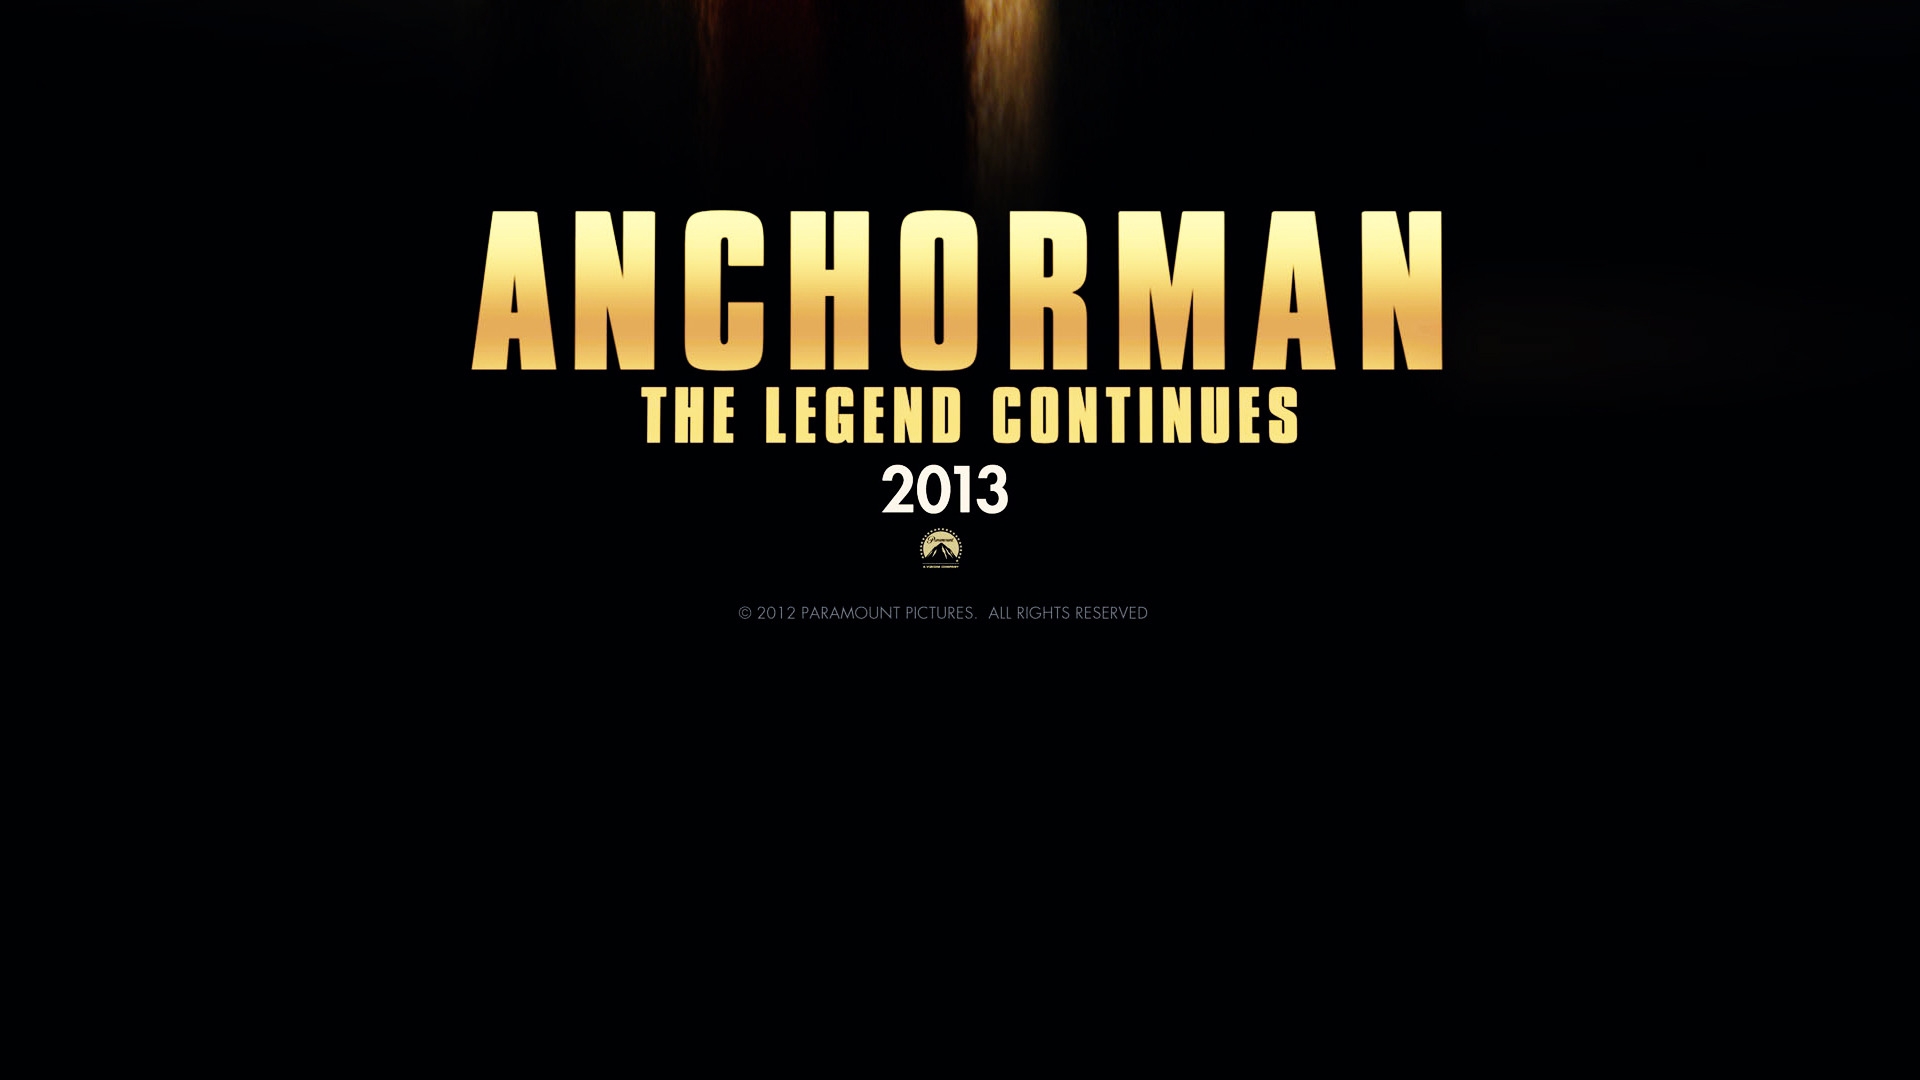 2013 Anchorman The Legend Continues for 1920 x 1080 HDTV 1080p resolution